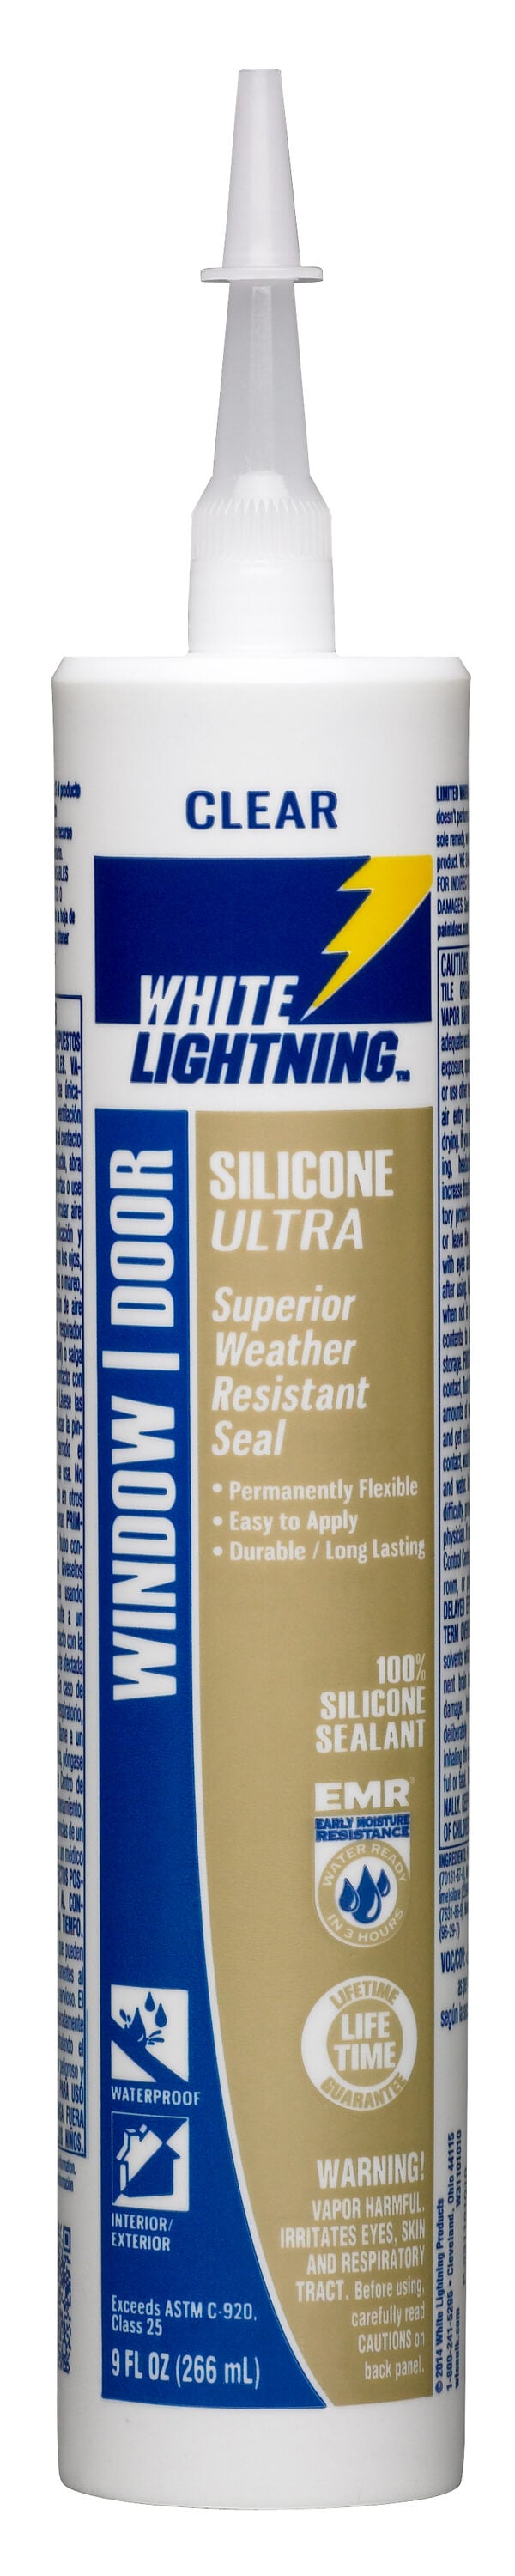 White Lightning Window and Door 10-oz Clear Silicone Caulk in the